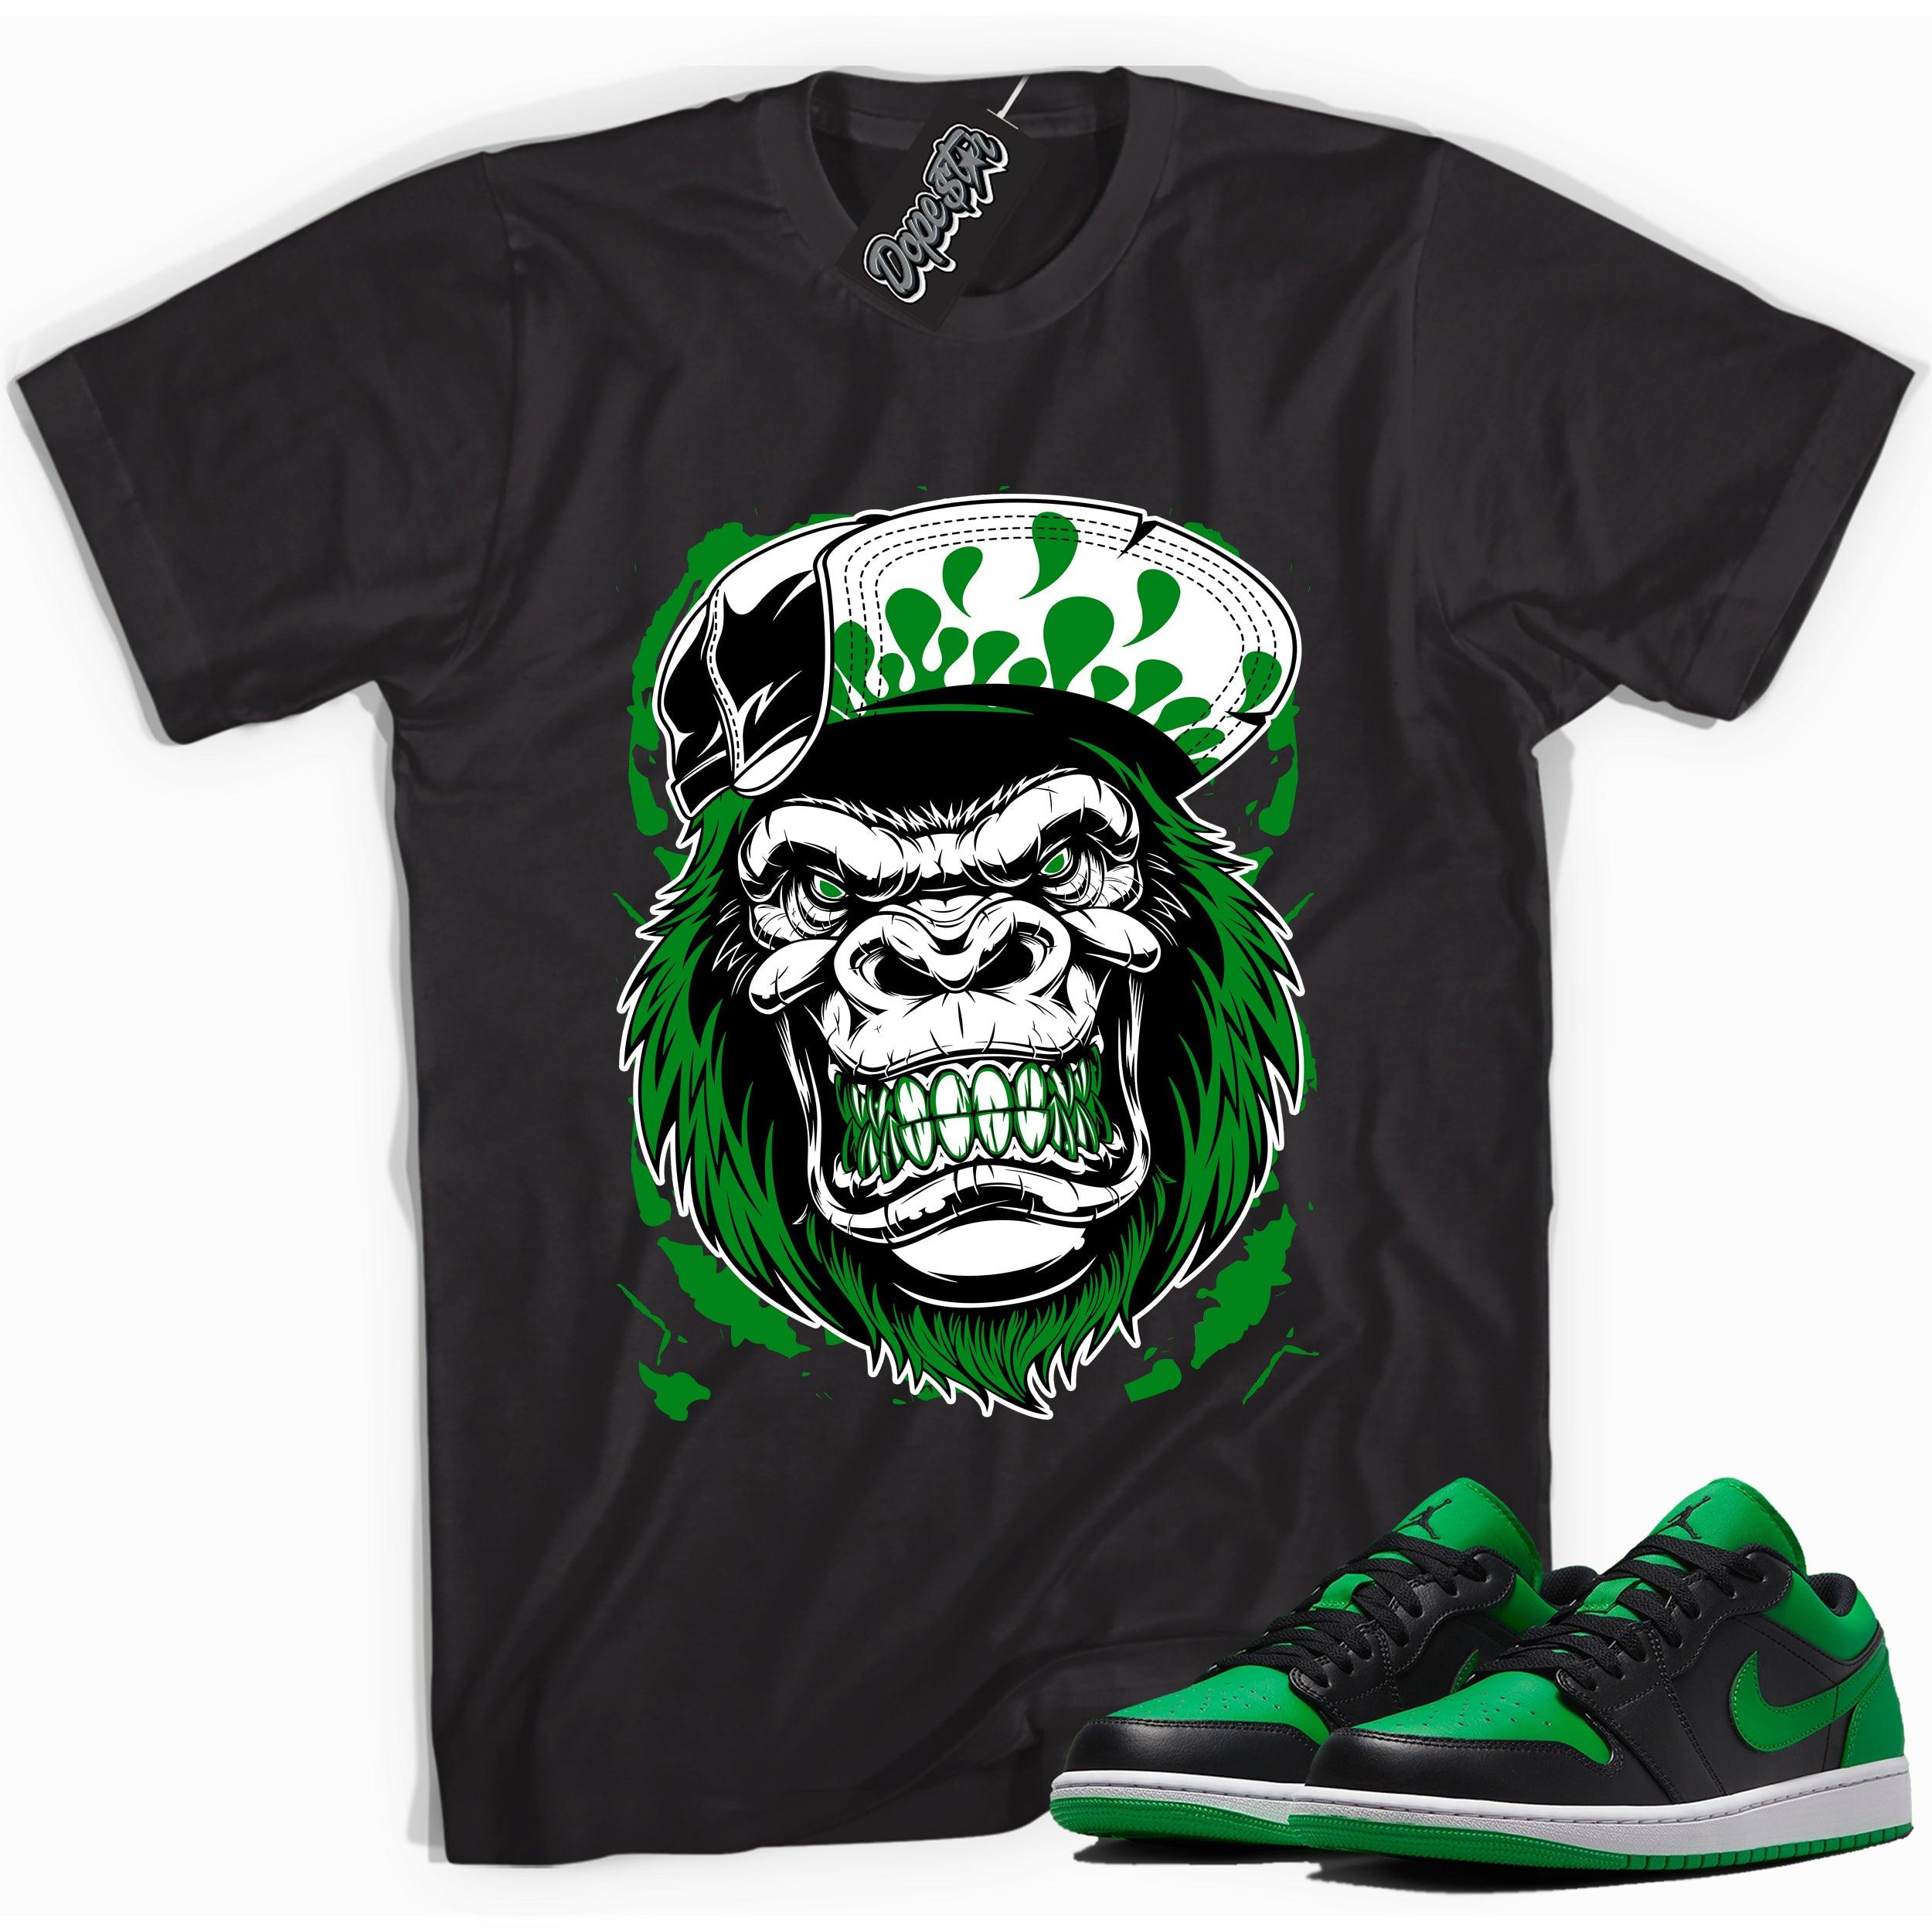 Cool black graphic tee with 'Gorilla Beast' print, that perfectly matches Air Jordan 1 Low Lucky Green sneakers